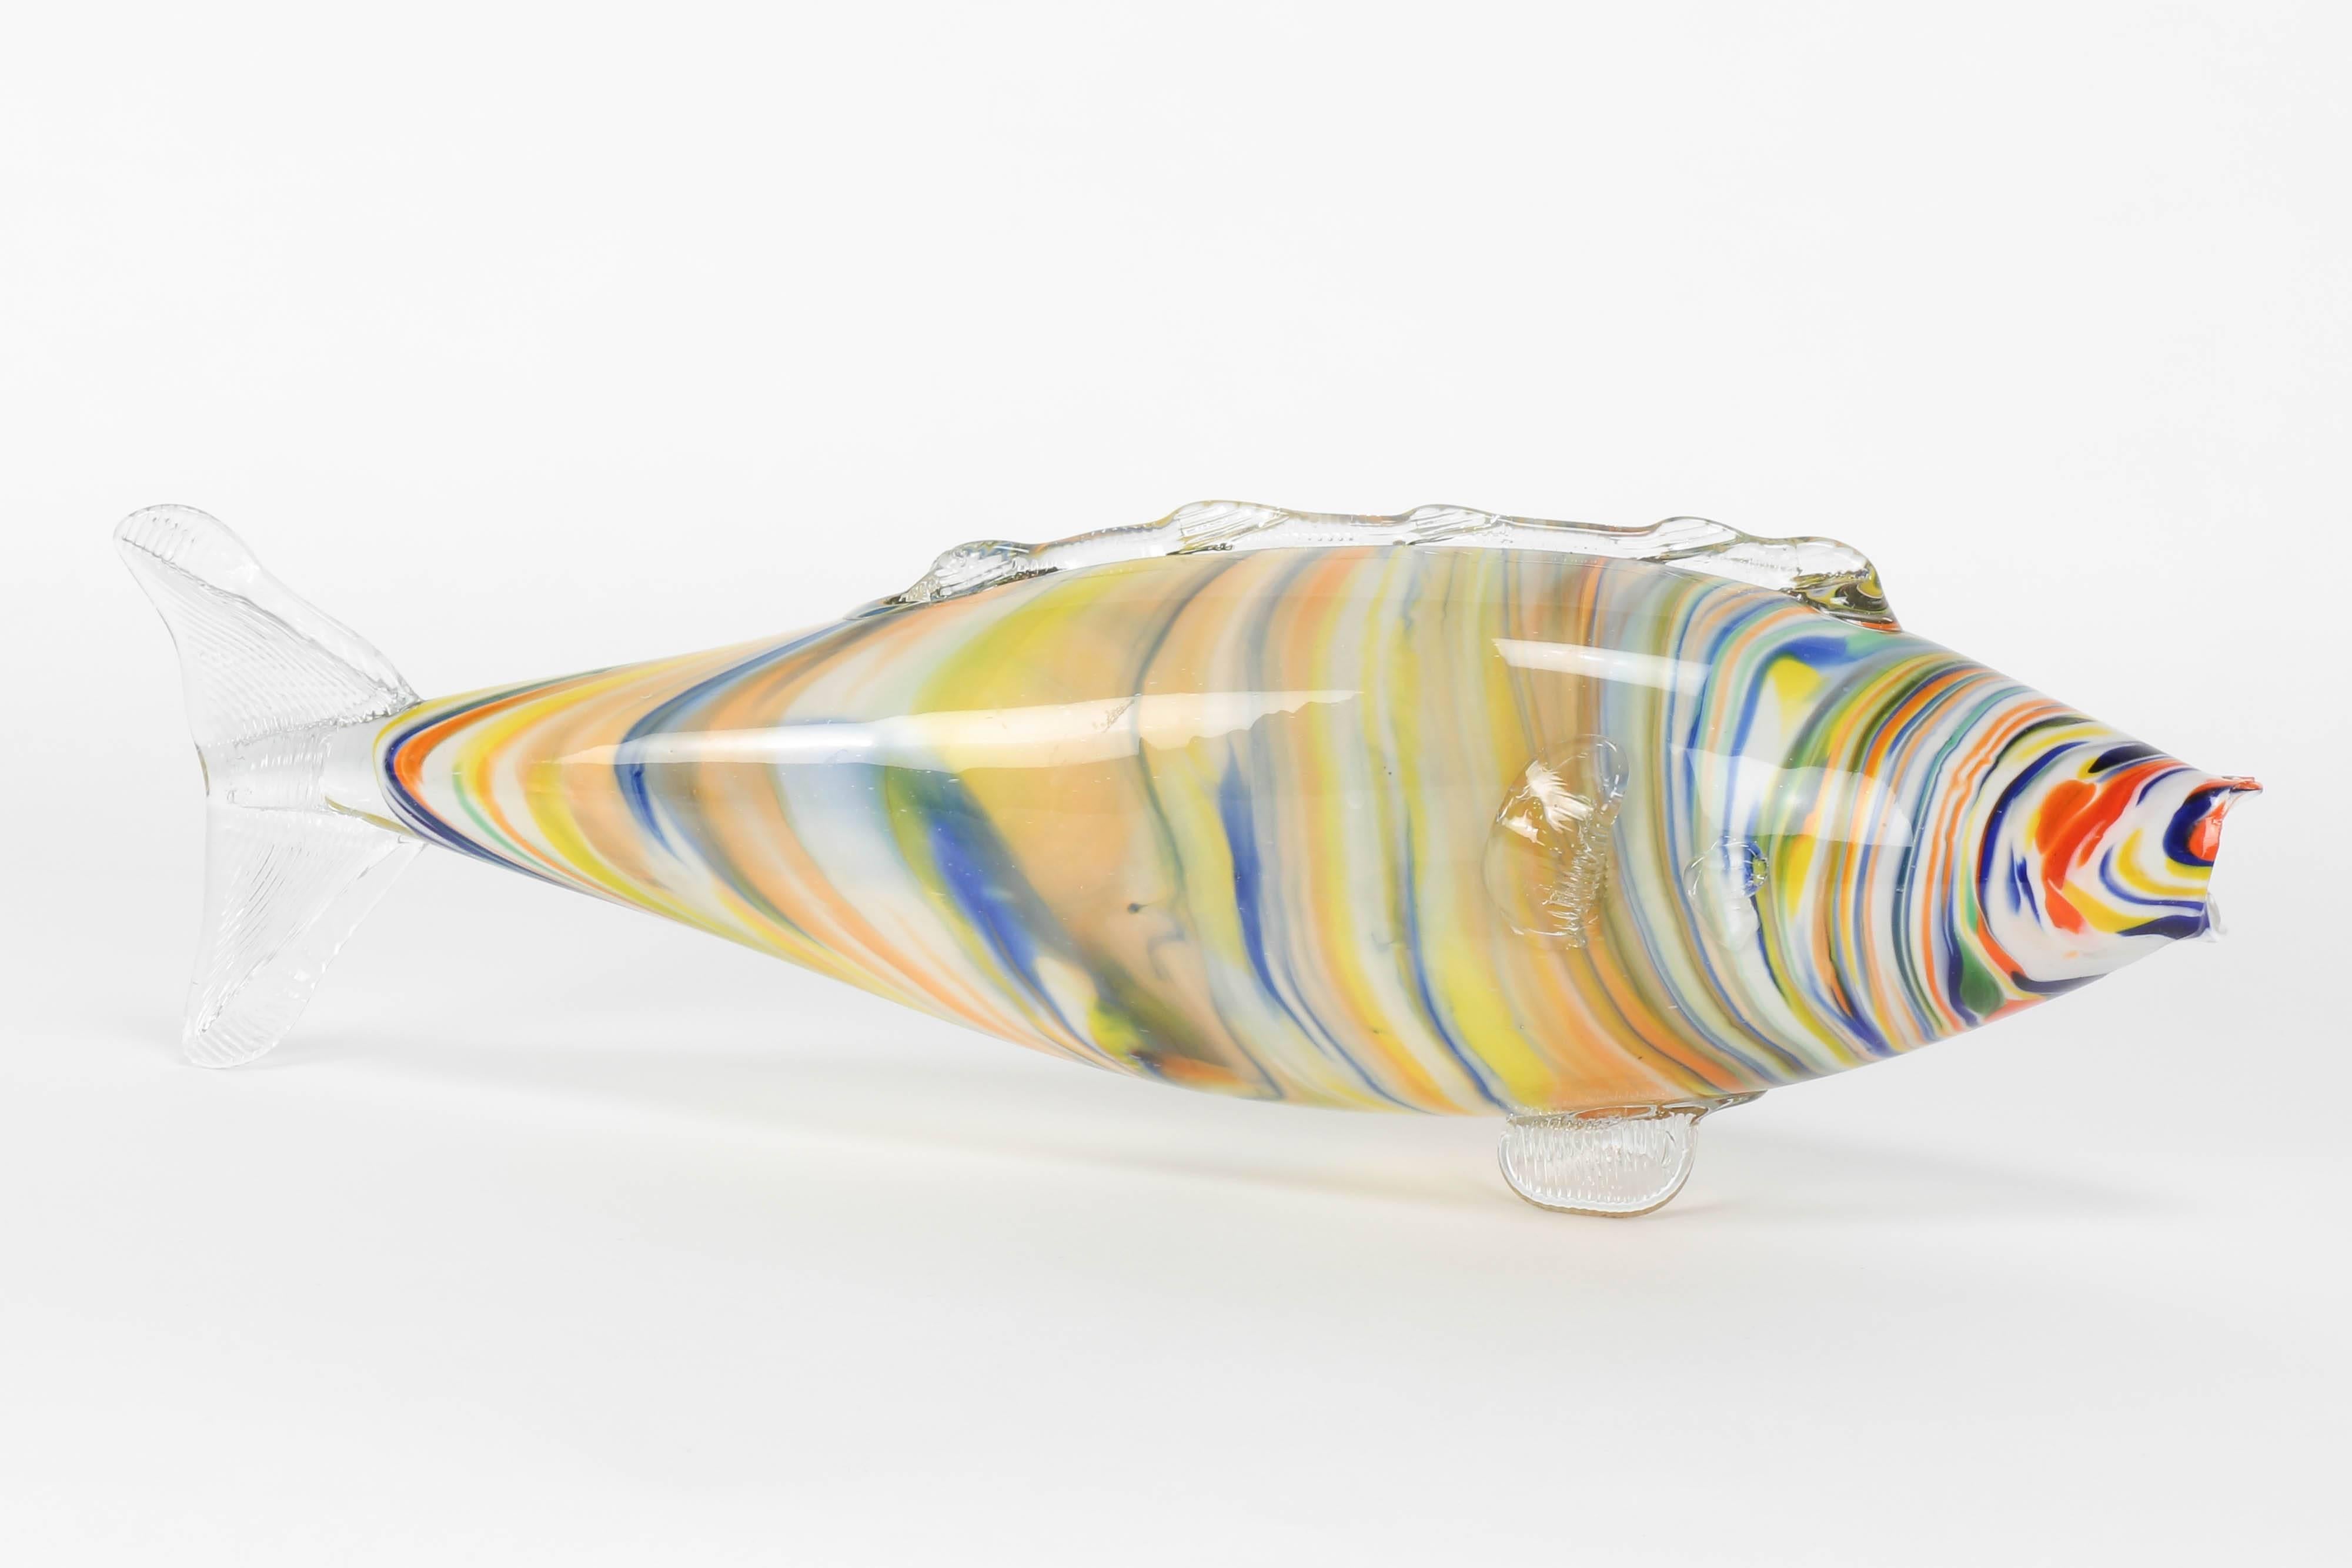 Huge handblown glass Murano fish, manufactured in Murano in the 1950s. The sculpture is made of three layered overlay glass; inside and outside colorless glass, the layer between colorful glass. It has a sharp ending due to the handblown working.